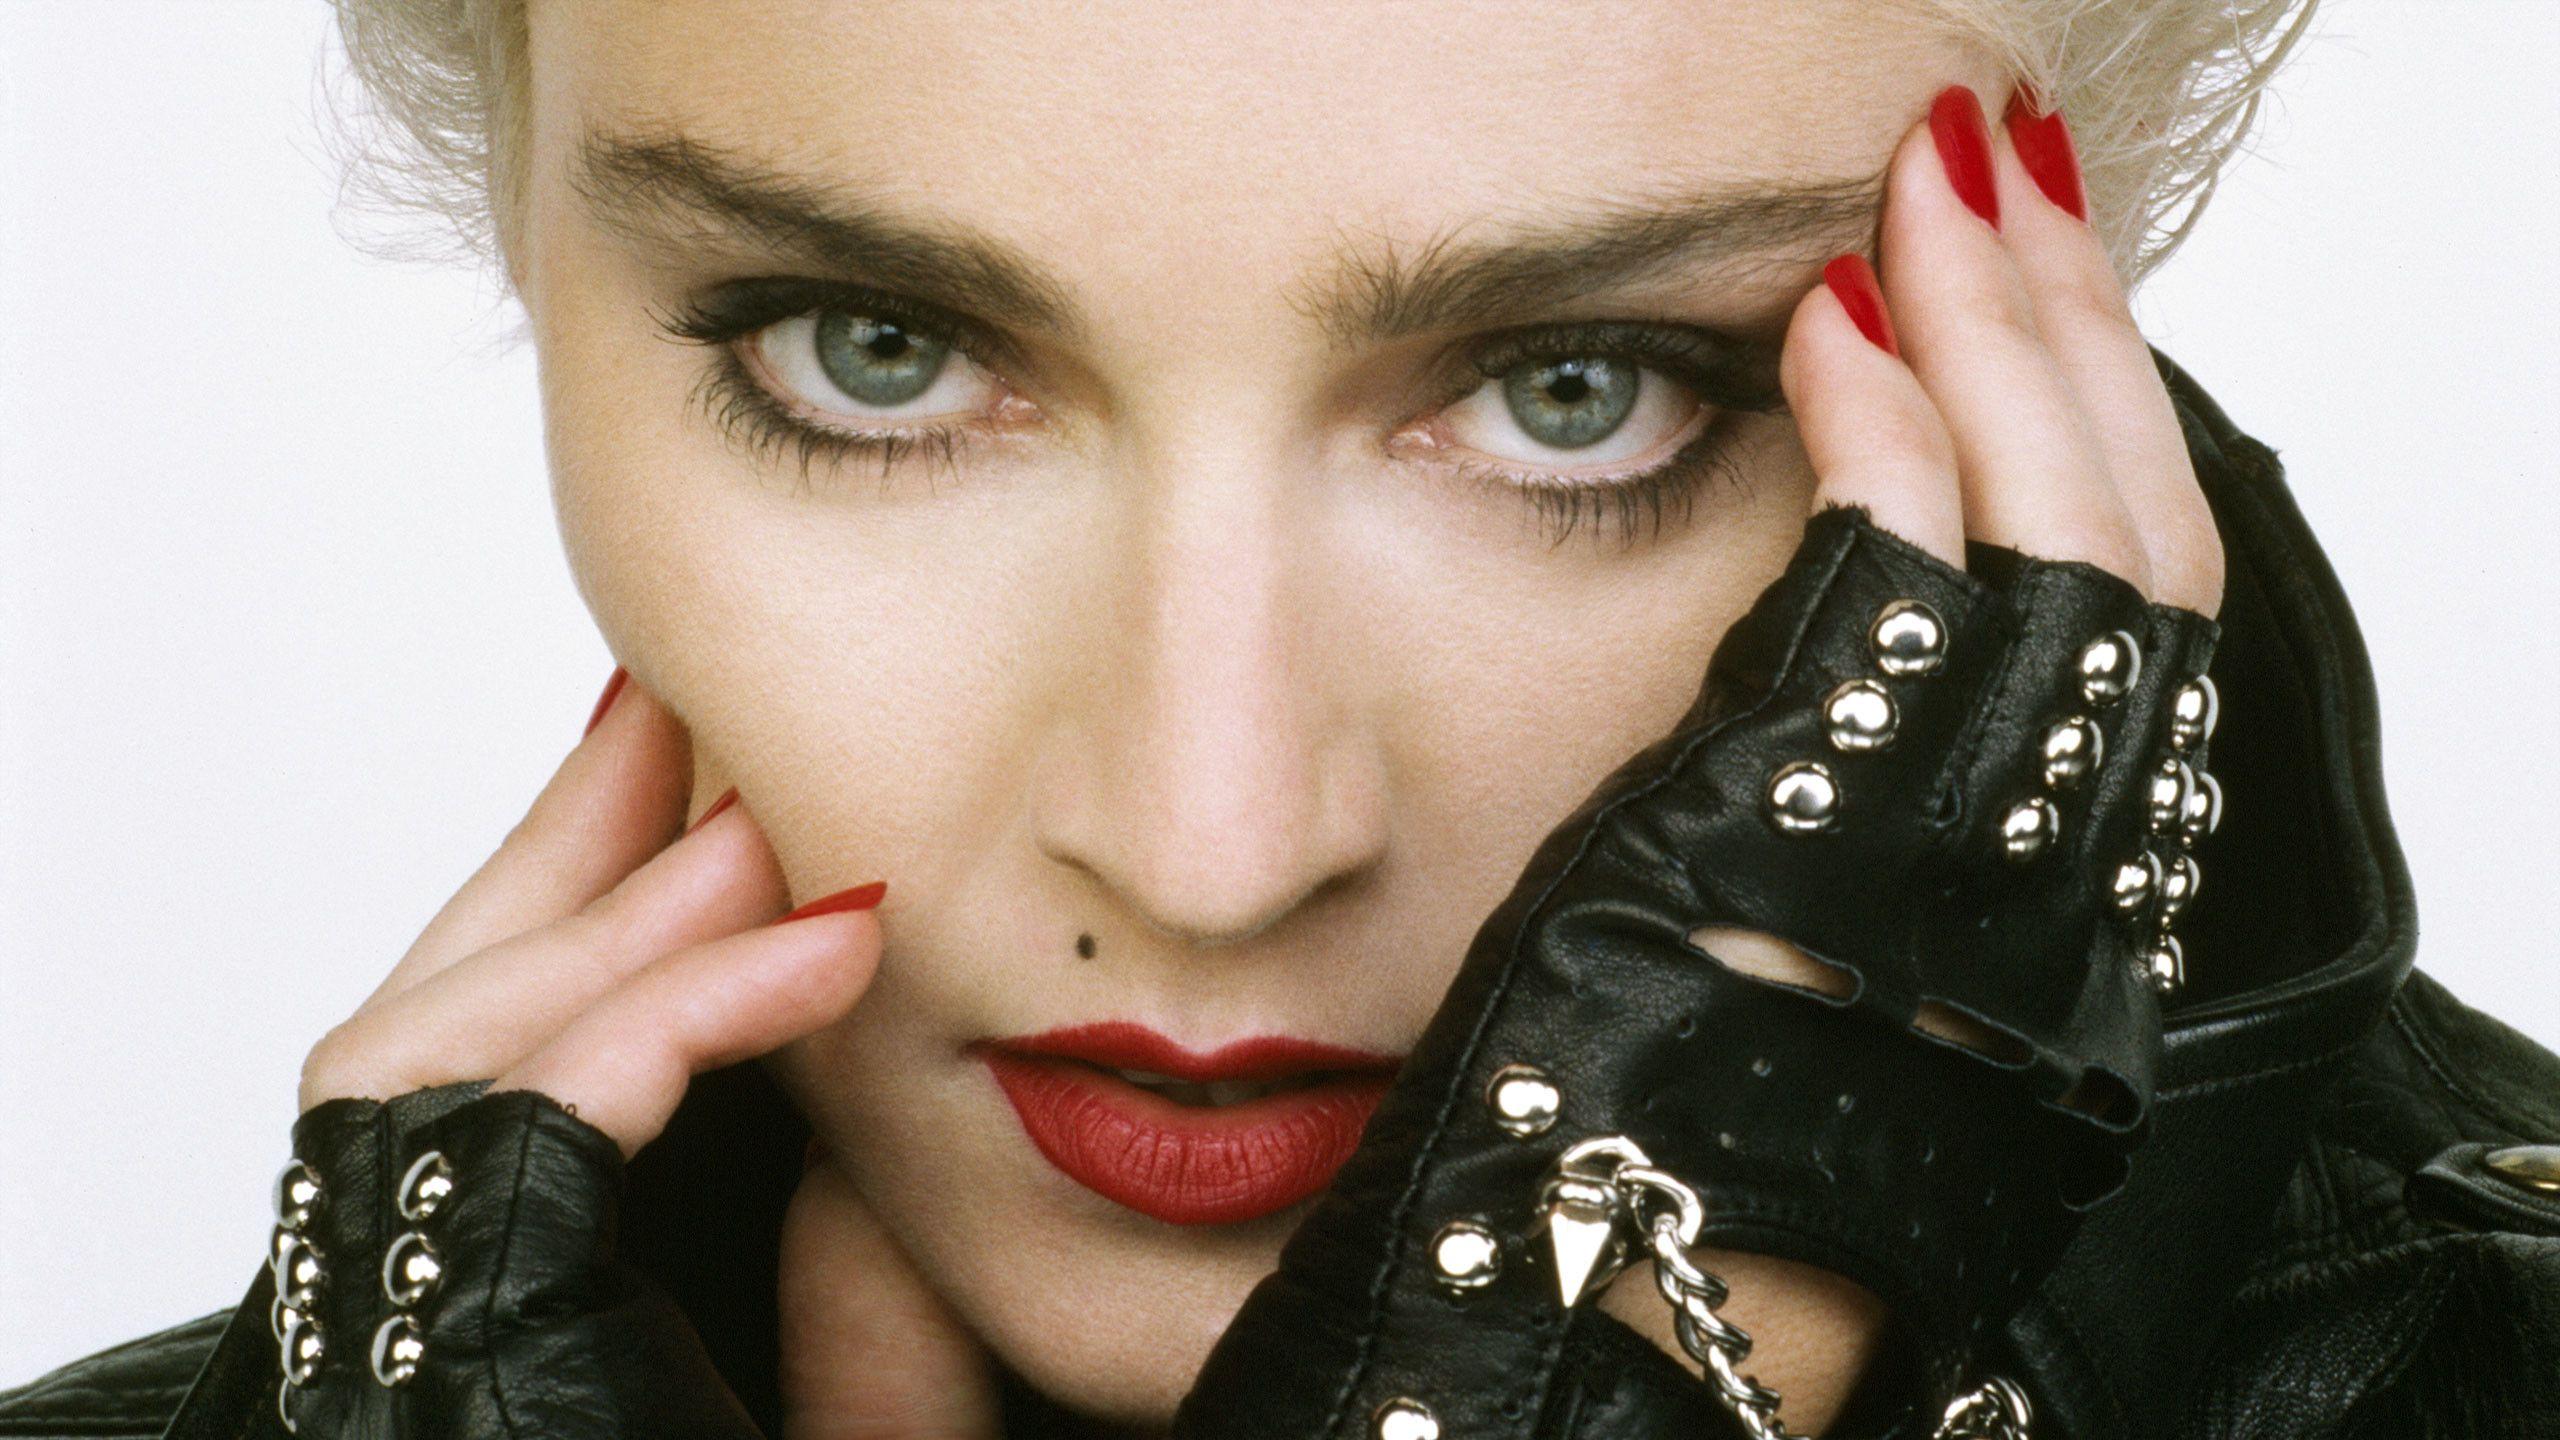 80s Madonna Wallpapers Top Free 80s Madonna Backgrounds WallpaperAccess